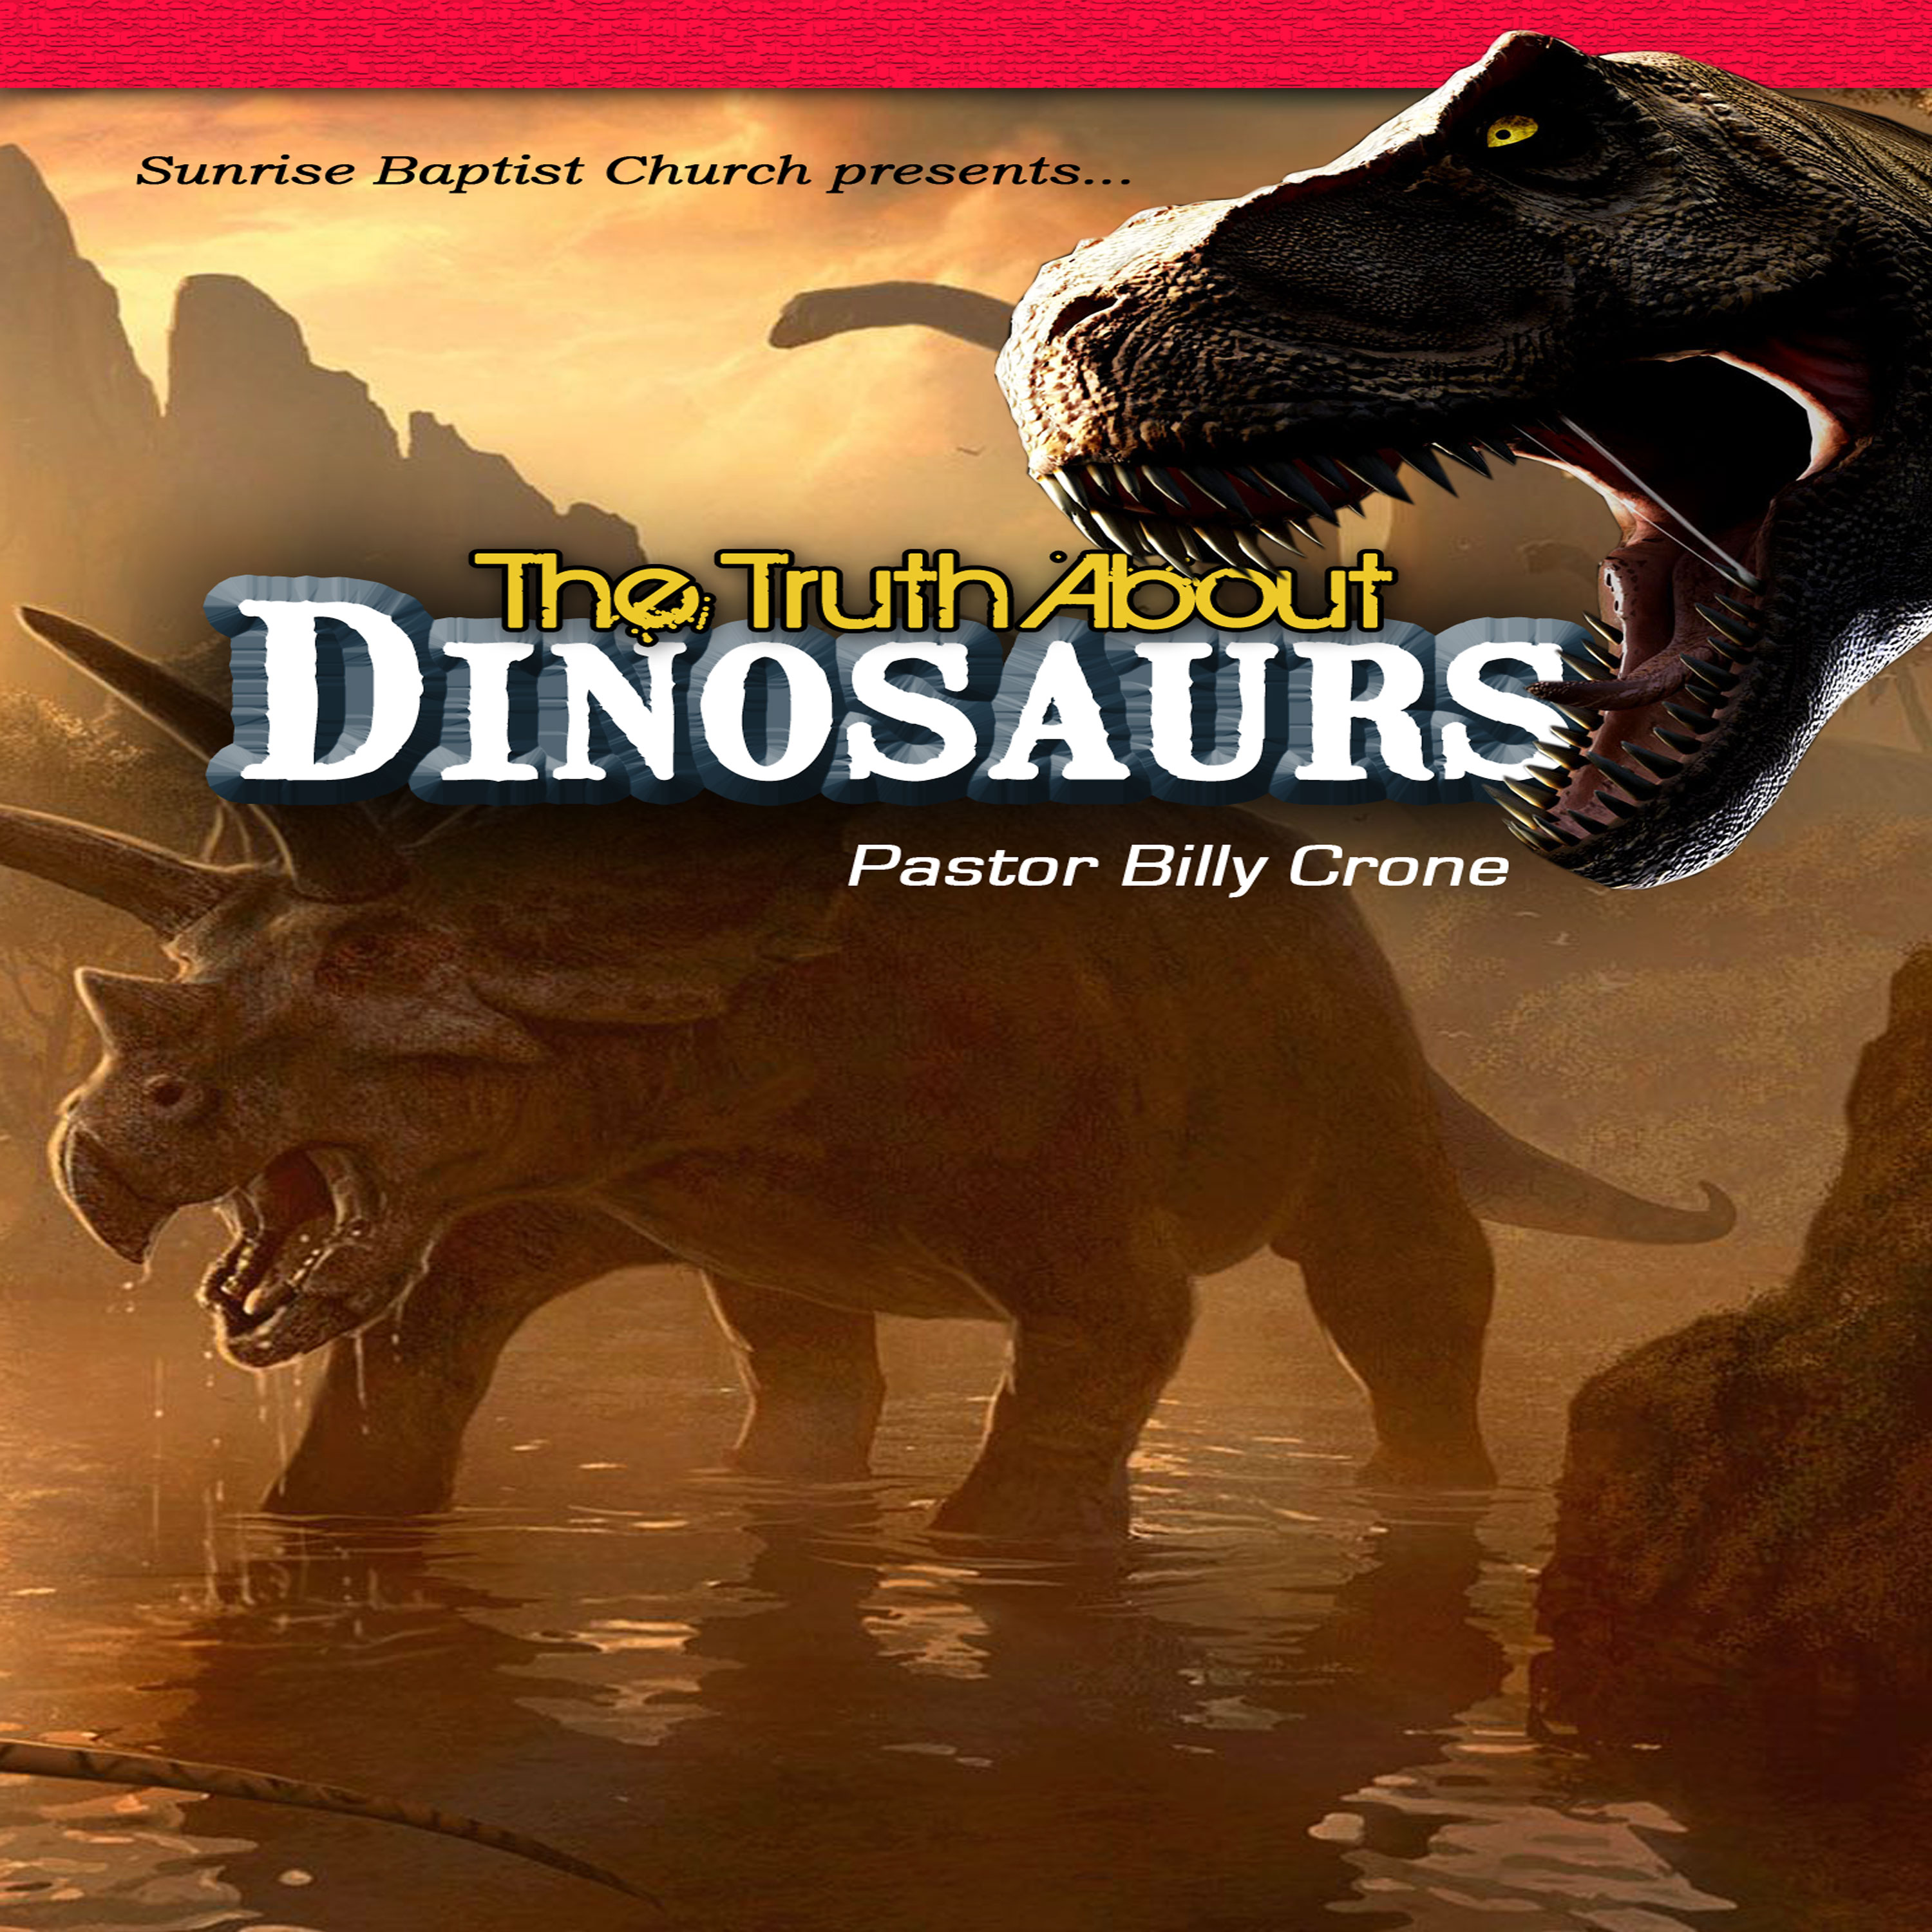 1 - Does The Bible Mention Dinosaurs?